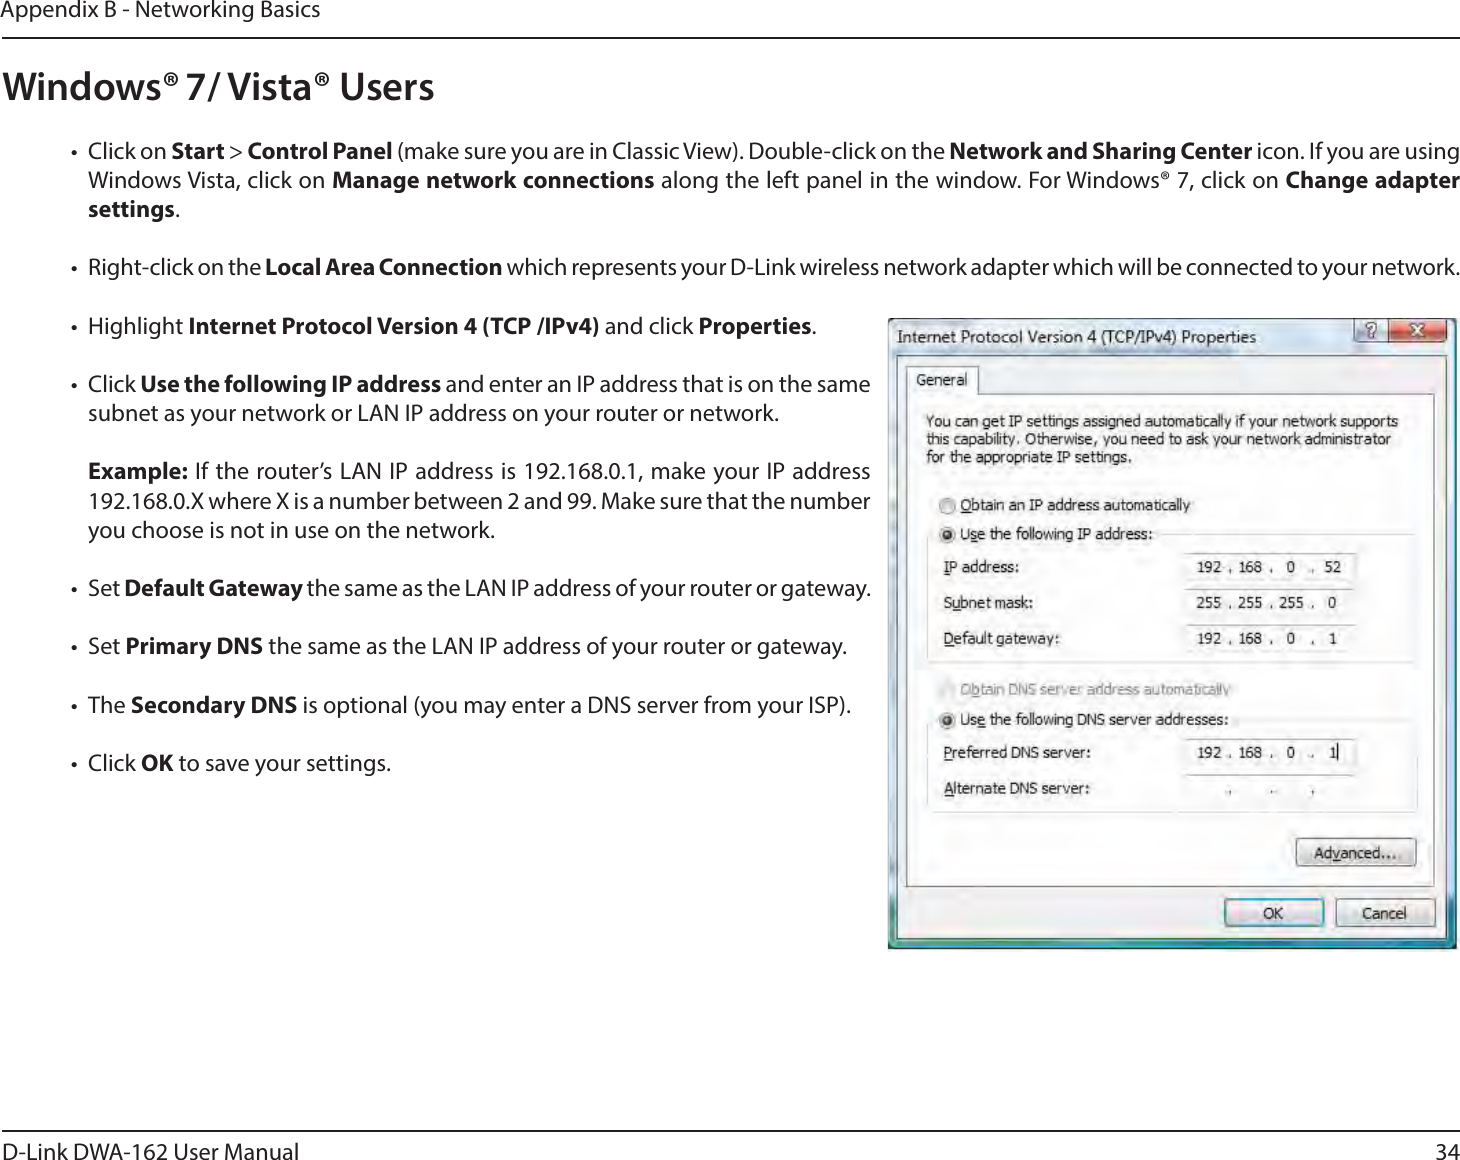 34D-Link DWA-162 User ManualAppendix B - Networking BasicsWindows® 7/ Vista® Userst $MJDLPOStart &gt; Control Panel (make sure you are in Classic View). Double-click on the Network and Sharing Center icon. If you are using Windows Vista, click on Manage network connections along the left panel in the window. For Windows® 7, click on Change adapter settings.t 3JHIUDMJDLPOUIFLocal Area Connection which represents your D-Link wireless network adapter which will be connected to your network.t )JHIMJHIUInternet Protocol Version 4 (TCP /IPv4) and click Properties.t $MJDLUse the following IP address and enter an IP address that is on the same subnet as your network or LAN IP address on your router or network. Example: If the router’s LAN IP address is 192.168.0.1, make your IP address 192.168.0.X where X is a number between 2 and 99. Make sure that the number you choose is not in use on the network. t 4FUDefault Gateway the same as the LAN IP address of your router or gateway.t 4FUPrimary DNS the same as the LAN IP address of your router or gateway. t 5IFSecondary DNS is optional (you may enter a DNS server from your ISP).t $MJDLOK to save your settings.